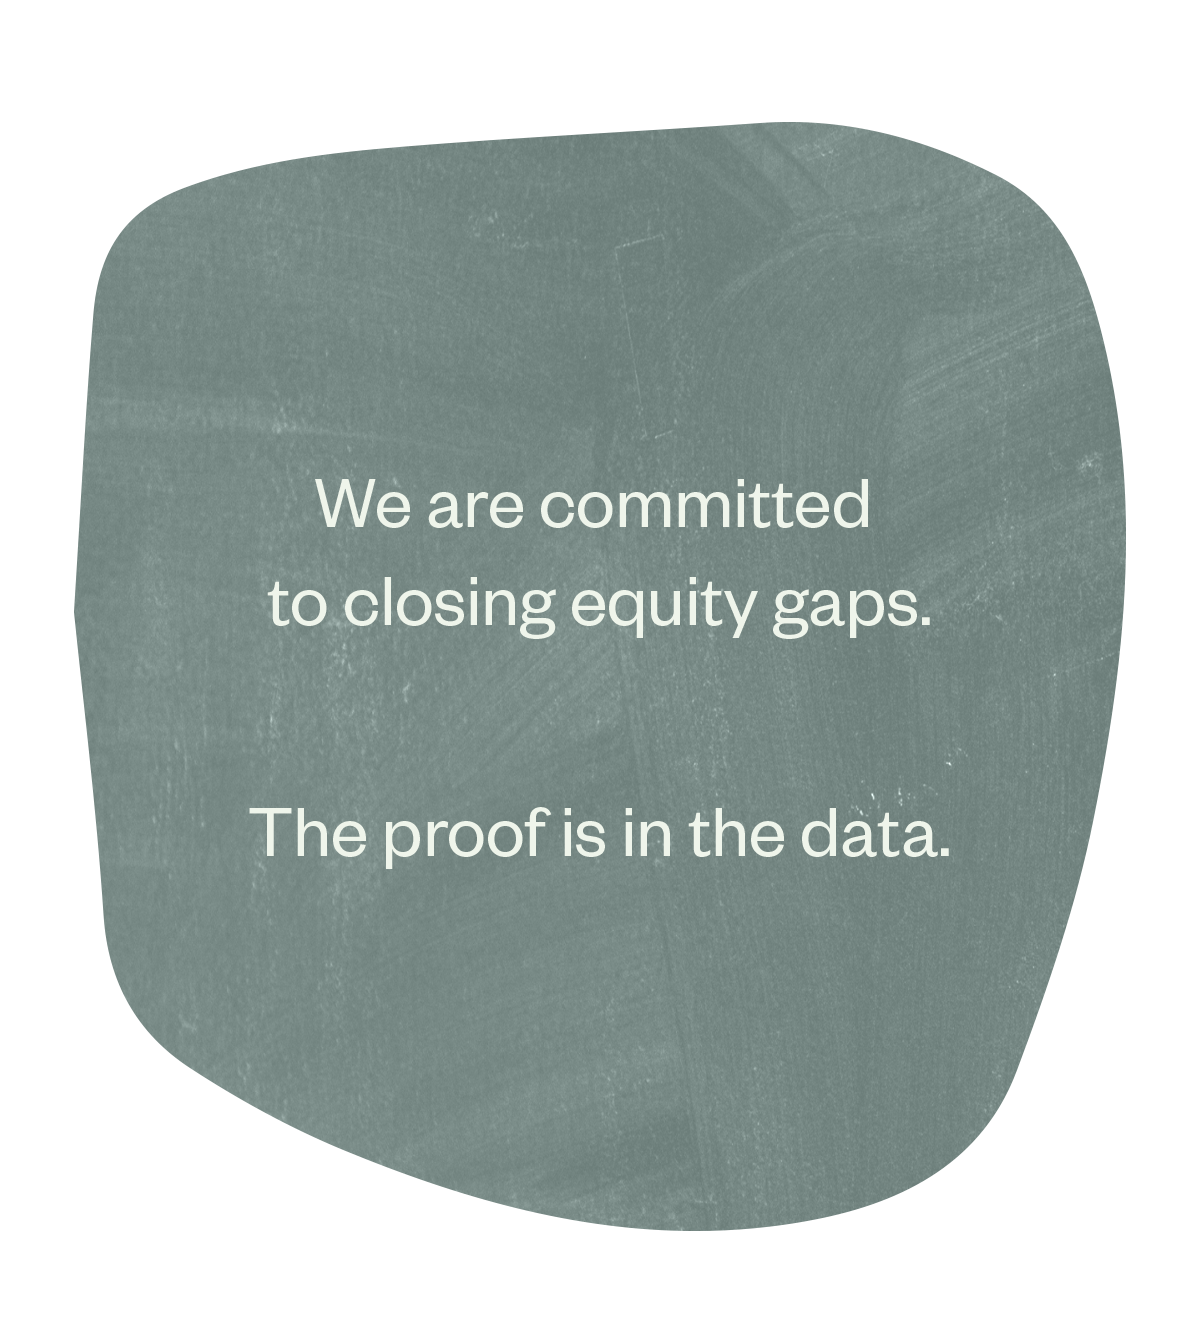 Data shows commitment to closing equity gap in agency by hiring more BIPOC employees.